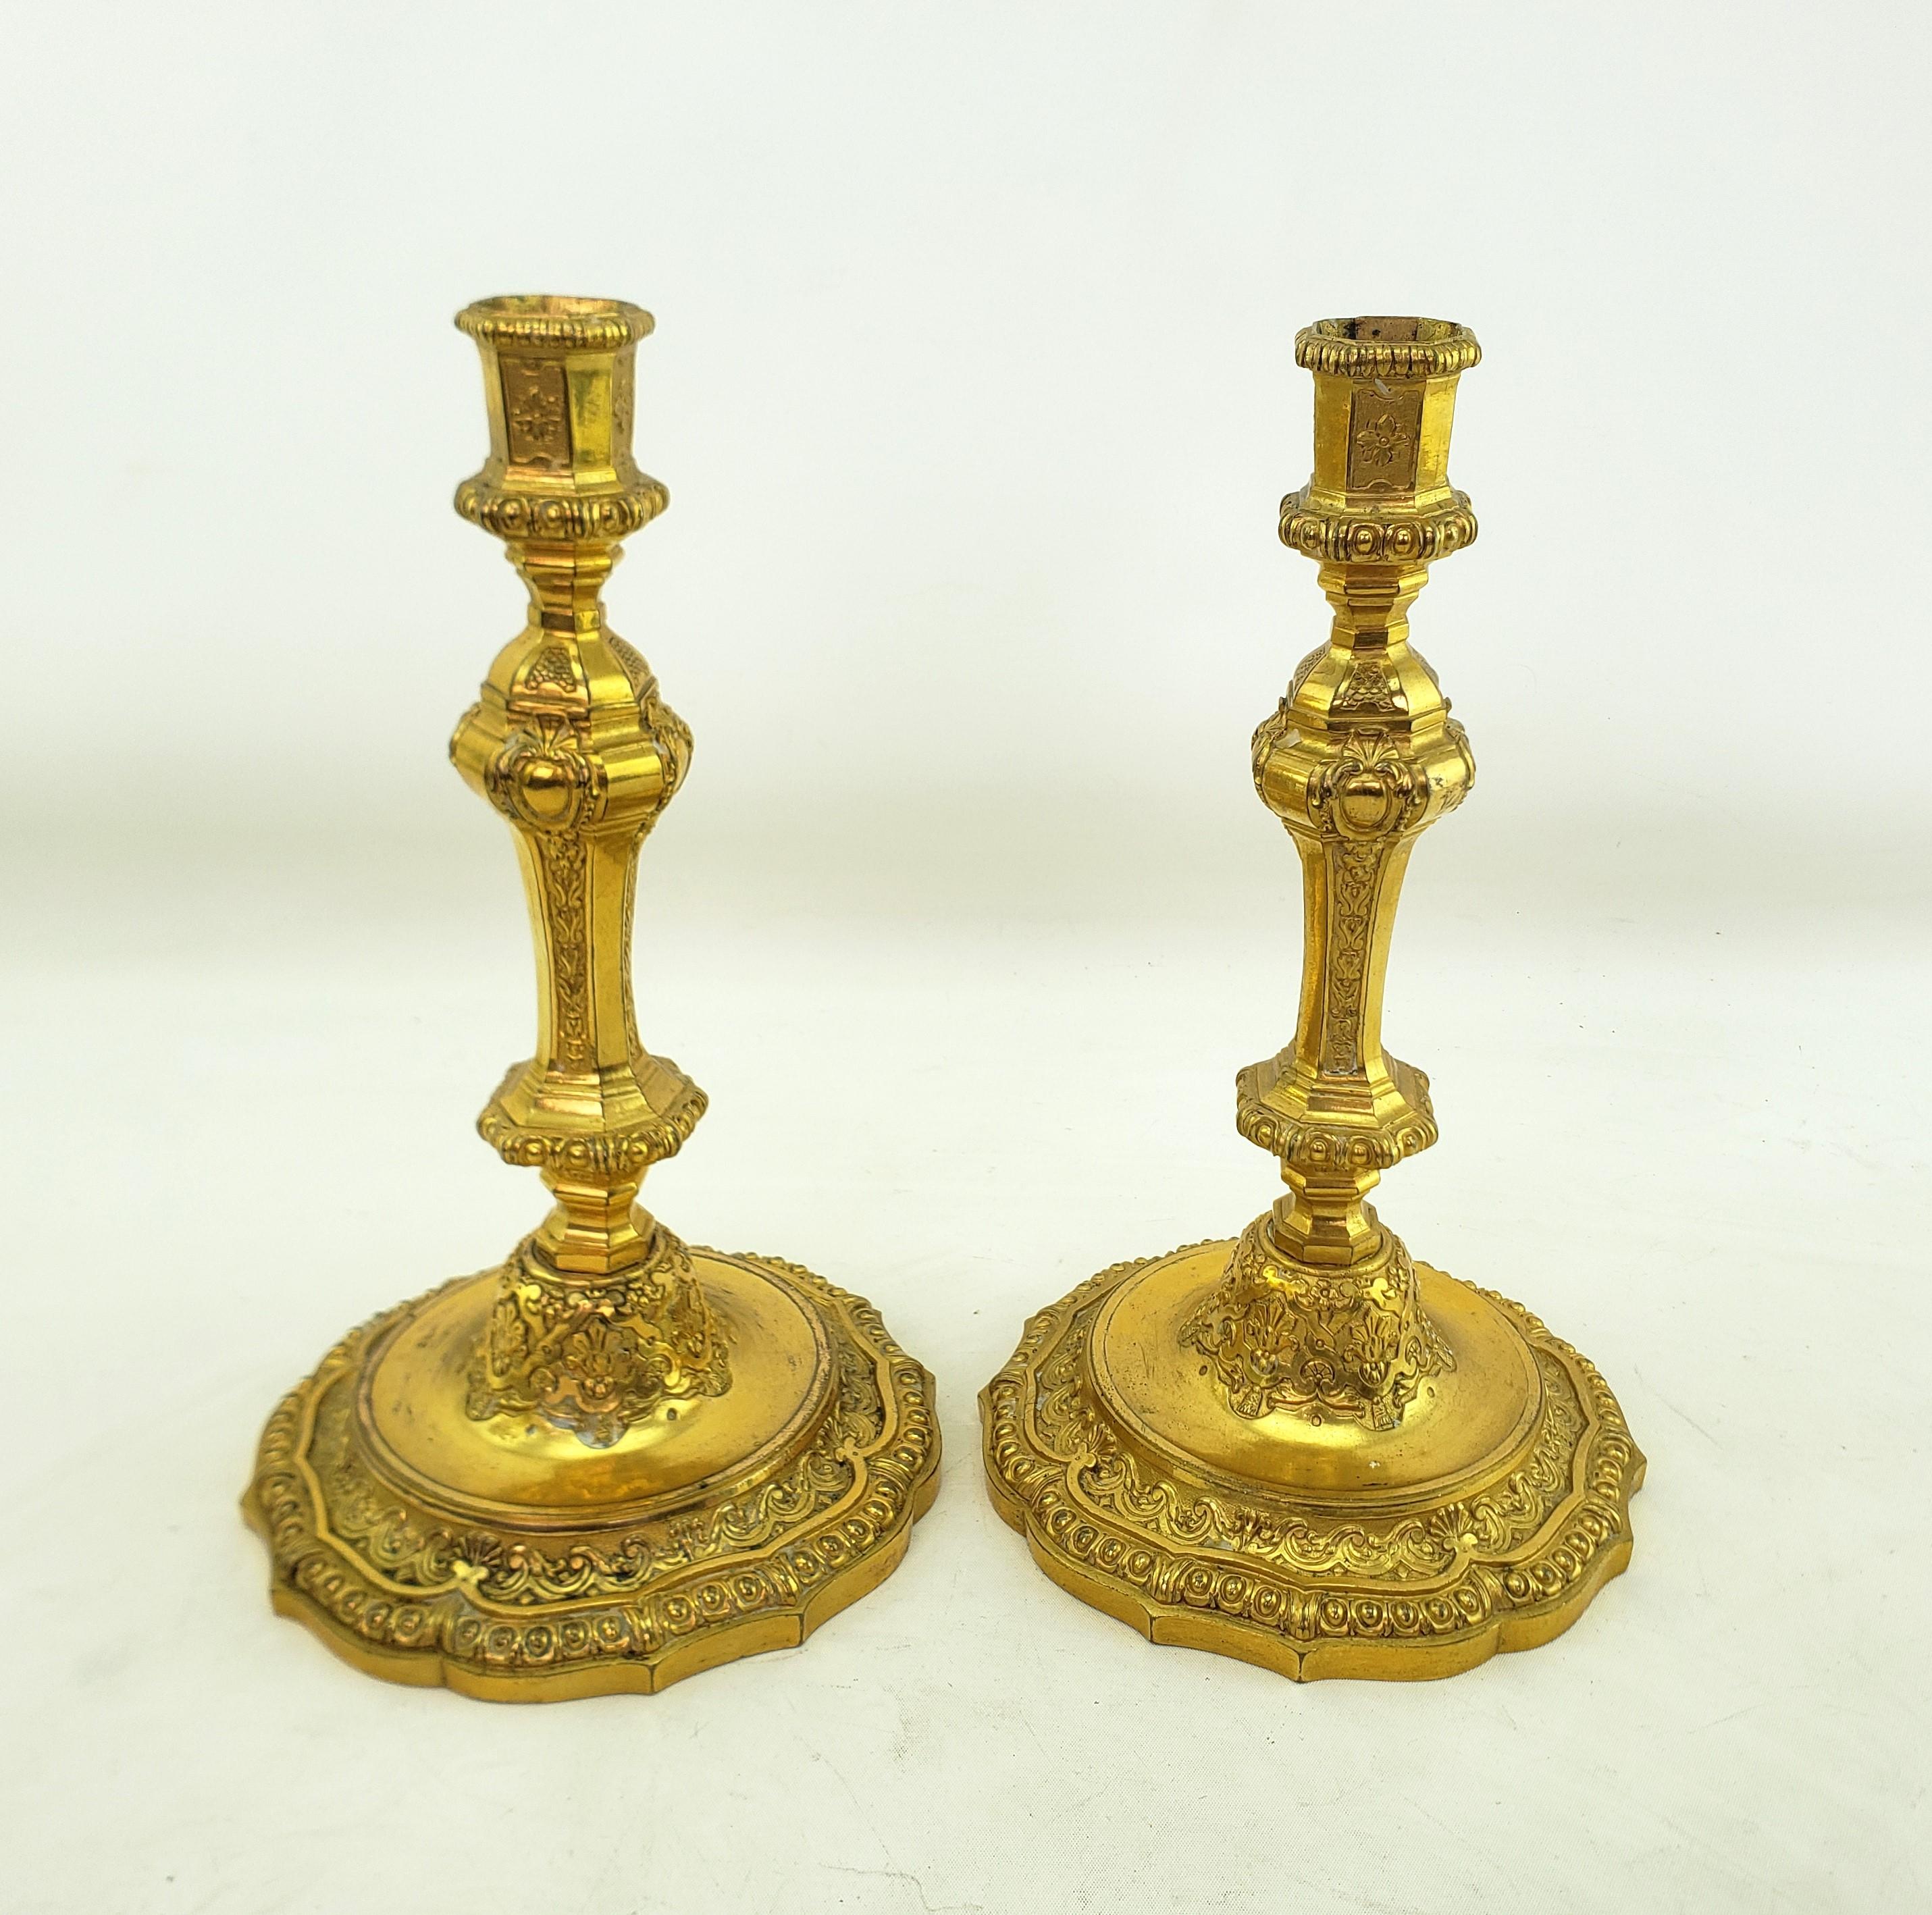 19th Century Pair of Antique Louis XIV Styled Gilt Bronze Candlesticks with Stylized Flowers For Sale